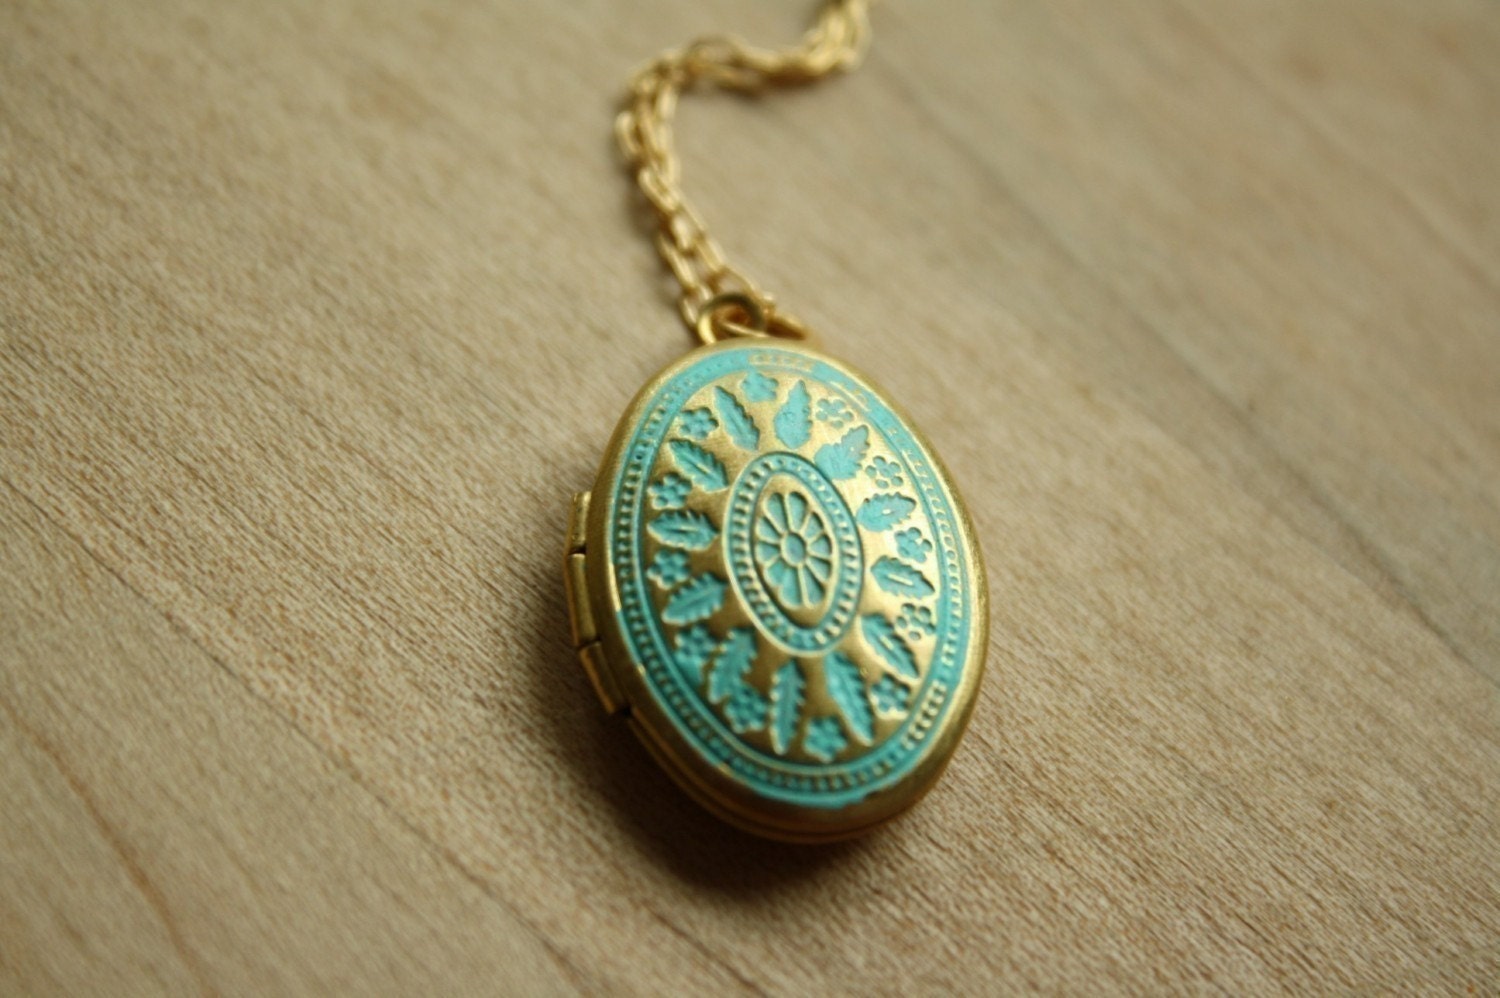 Little Blue Ornate Locket, Oval Pendant, Small Necklace, 14kt Gold Filled Chain, SImple and Delicate